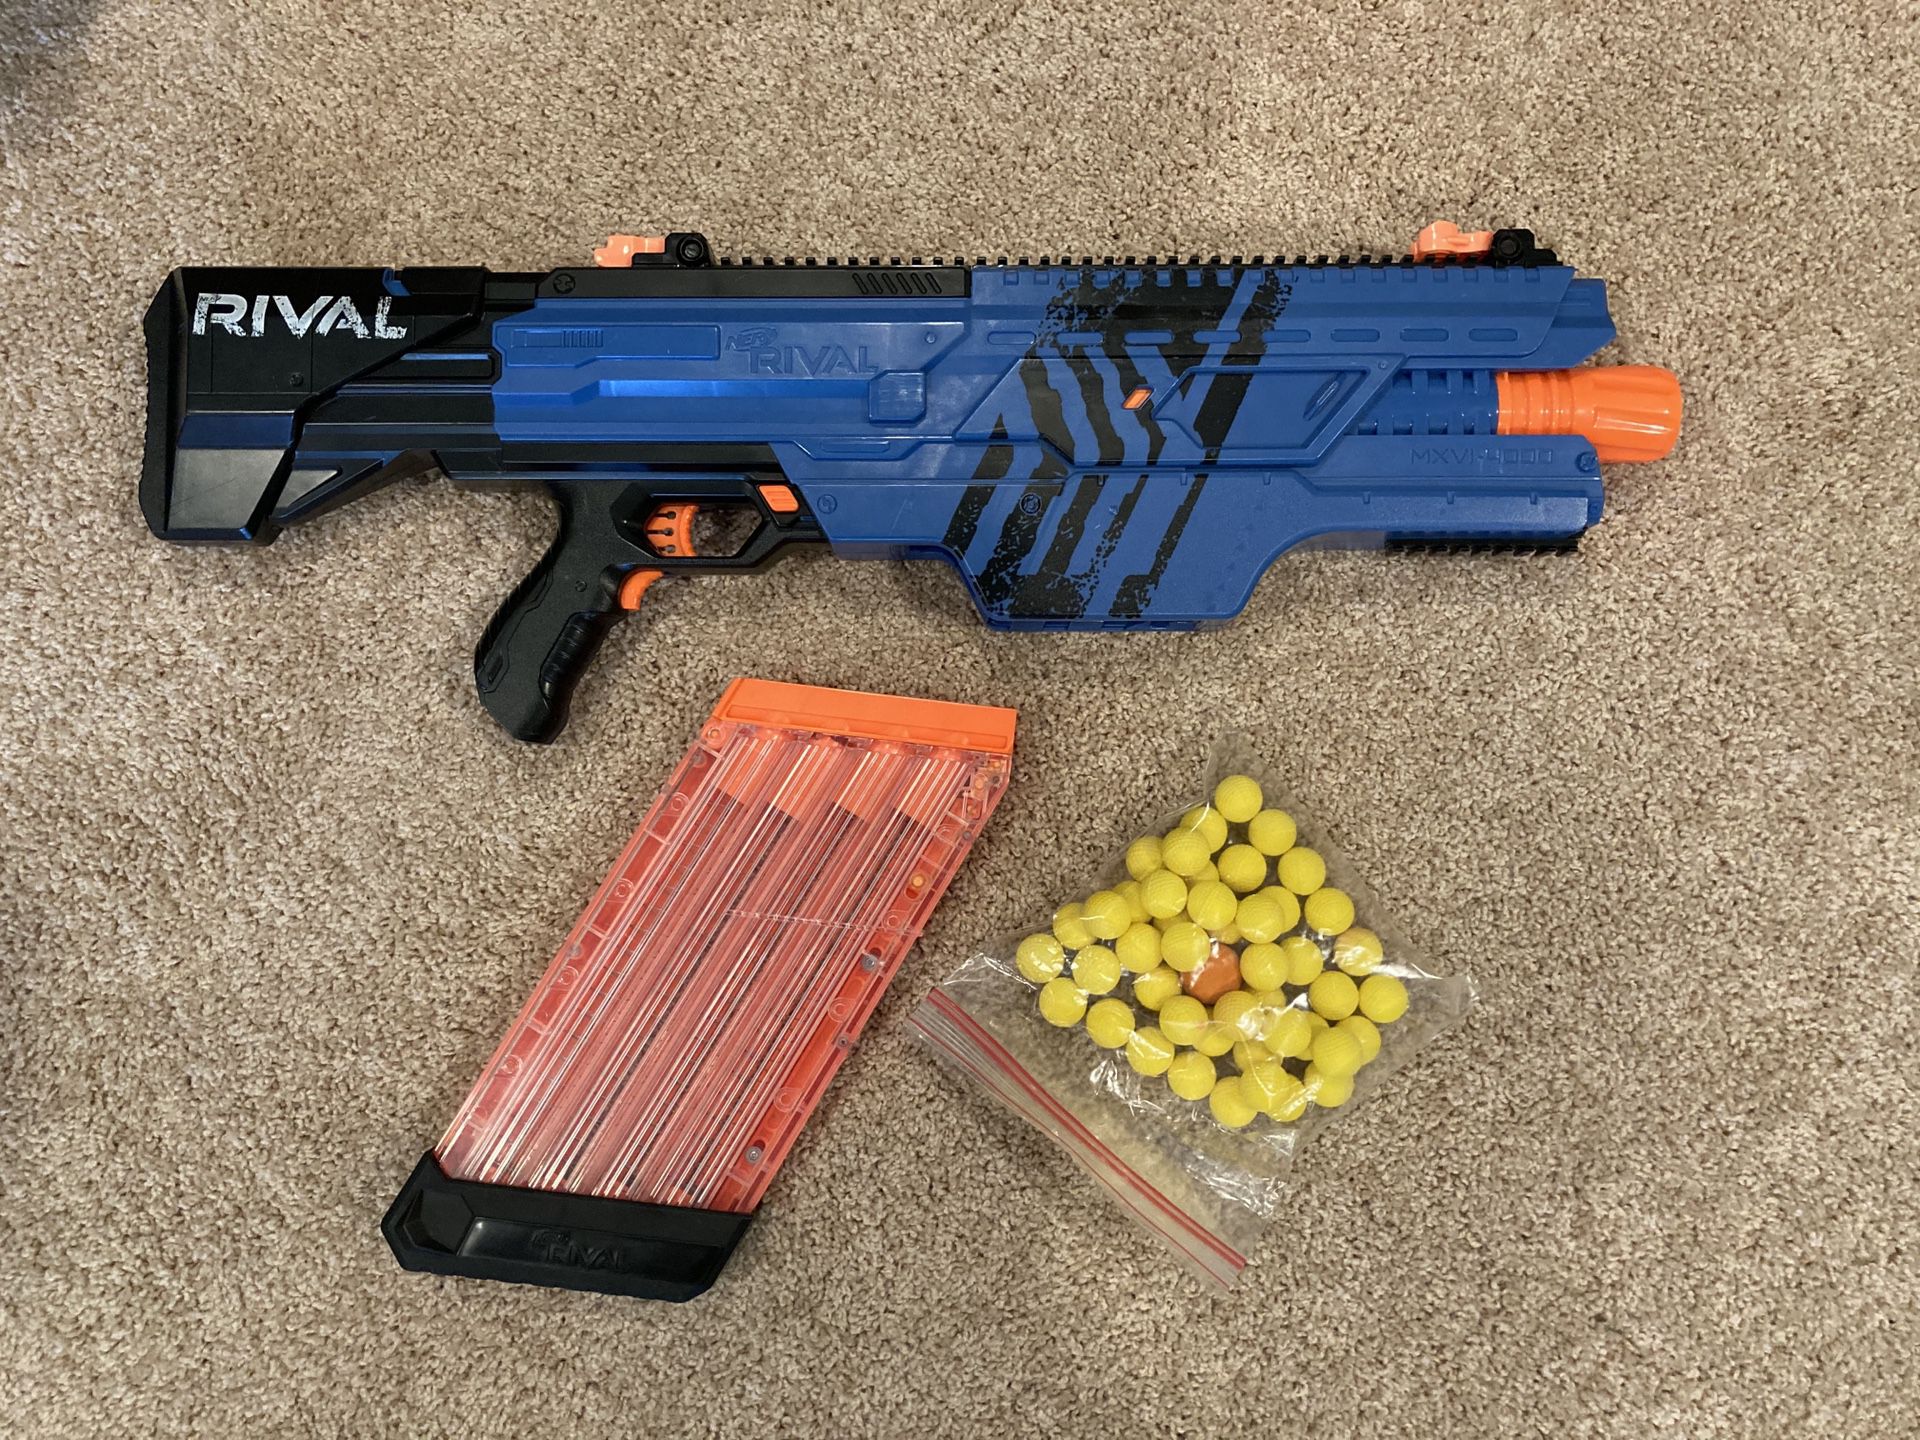 Nerf Rival MXVI-4000 Blue battery operated